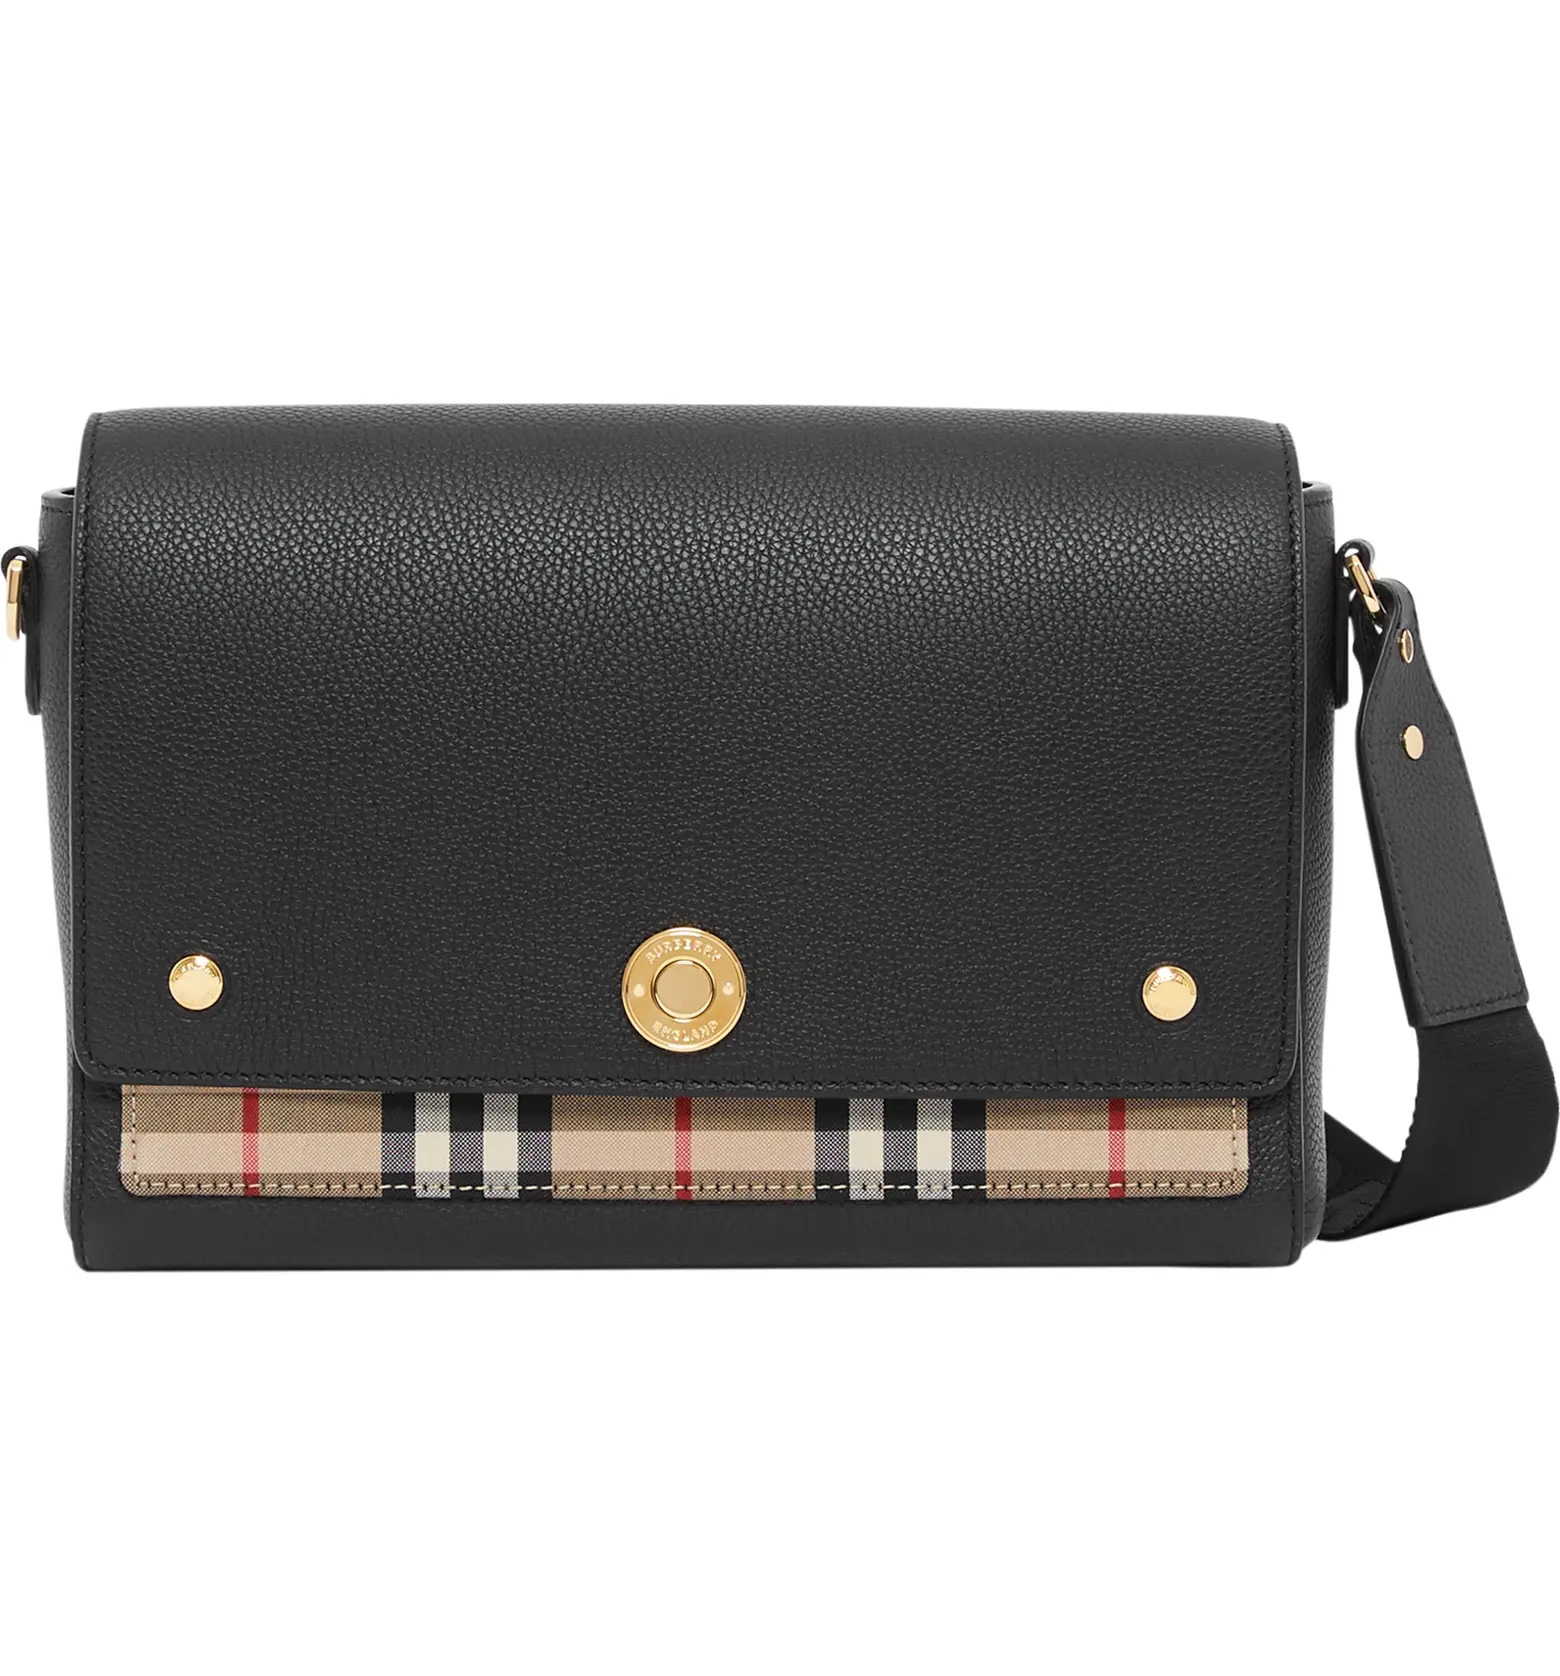 The Best Designer Crossbody Bags You Will Wear for Years